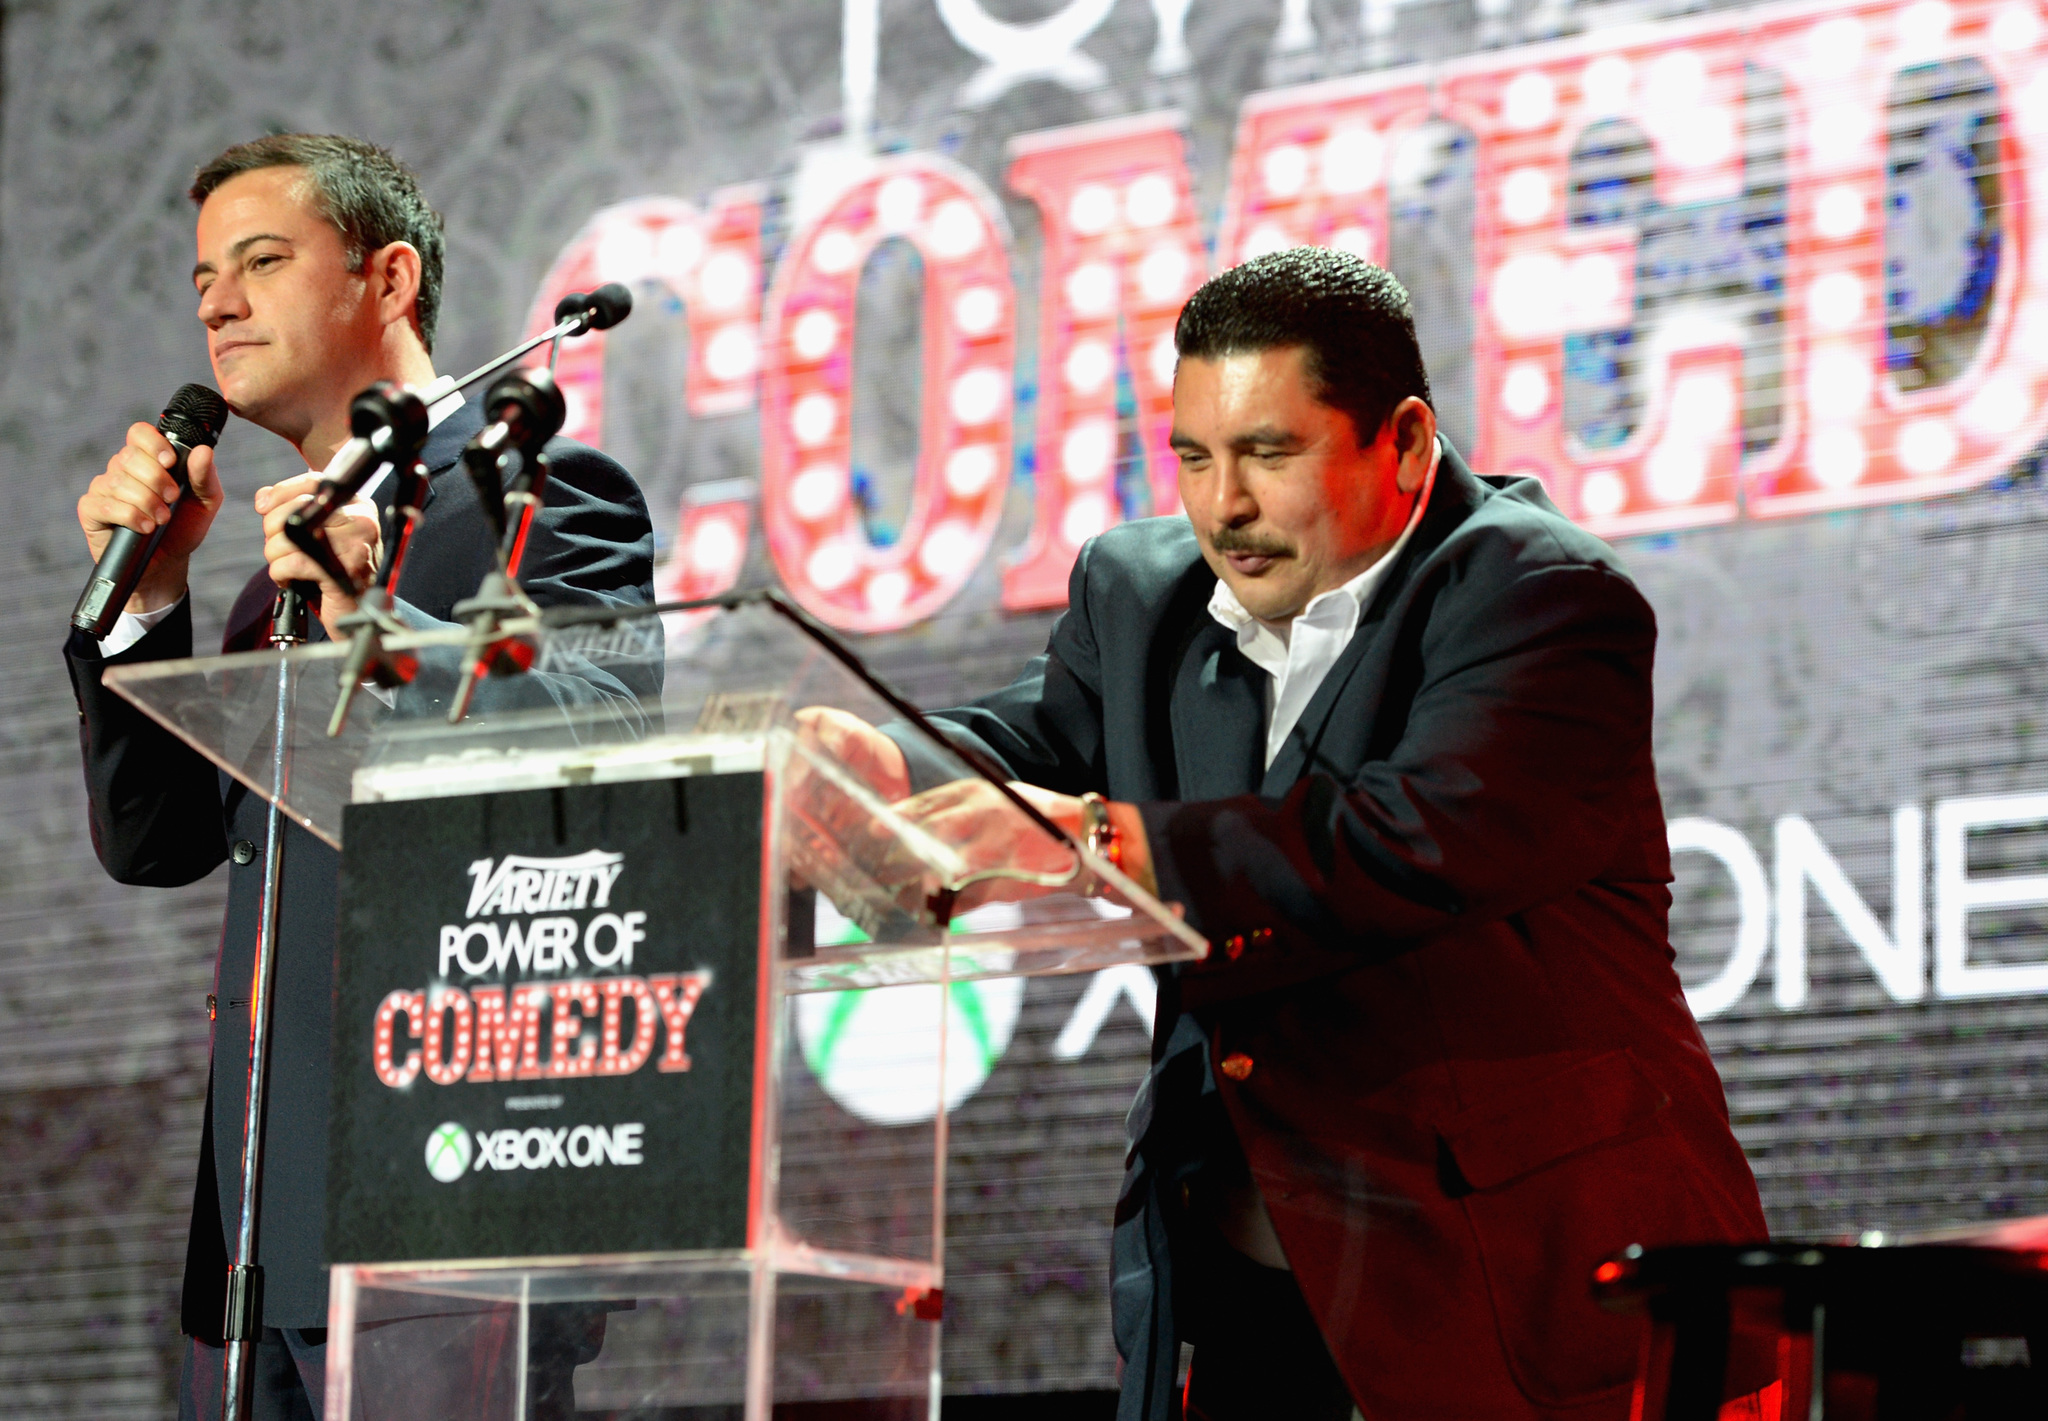 Jimmy Kimmel and Guillermo Rodriguez